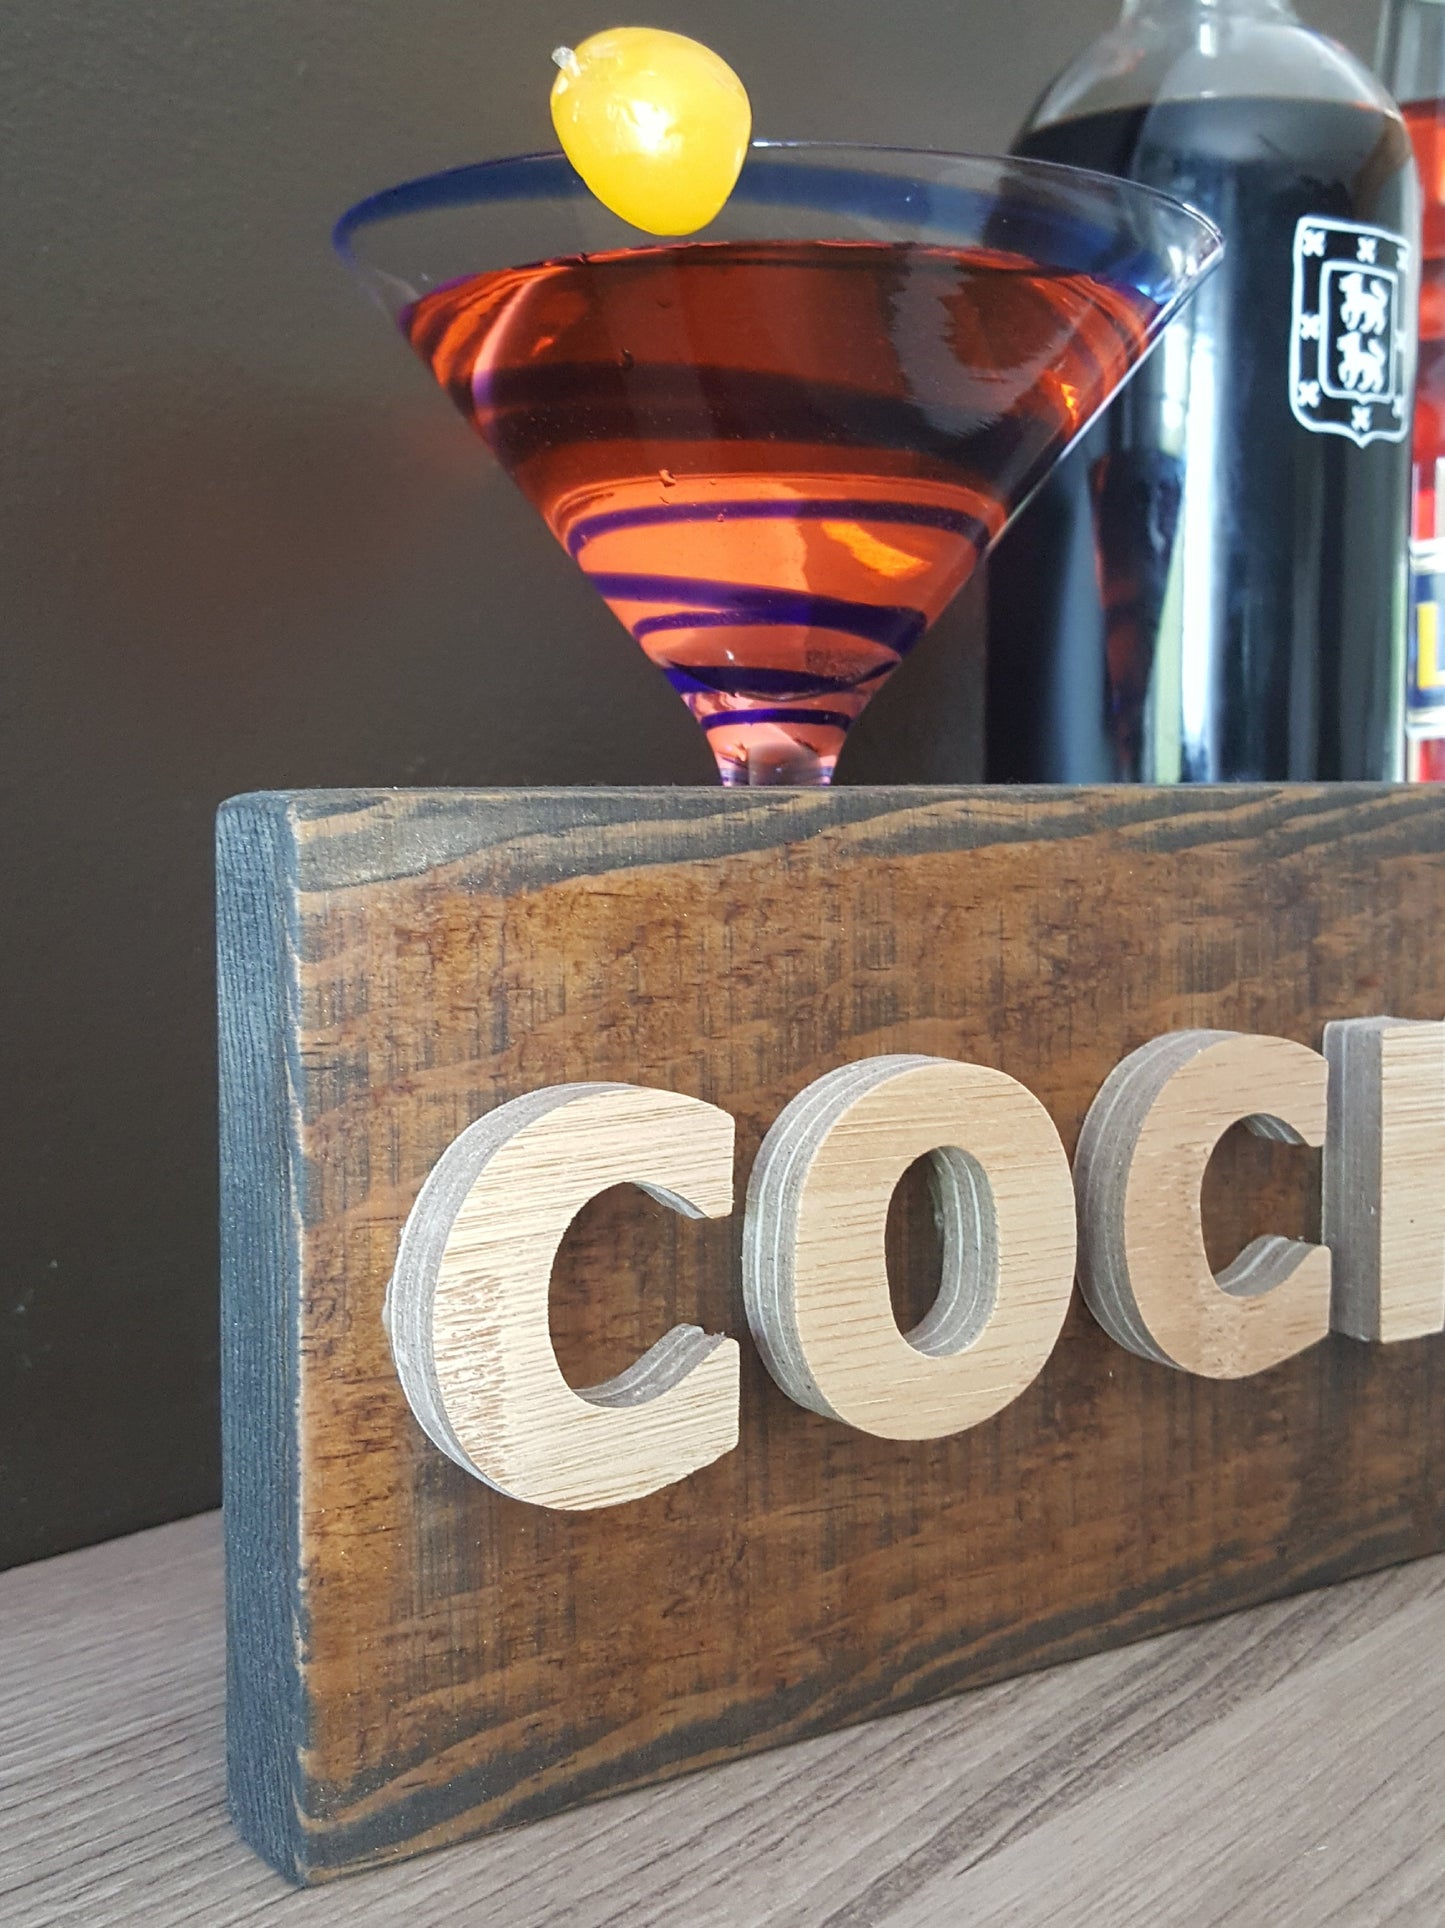 Cocktails Sign-Decor-in2ition mercantile